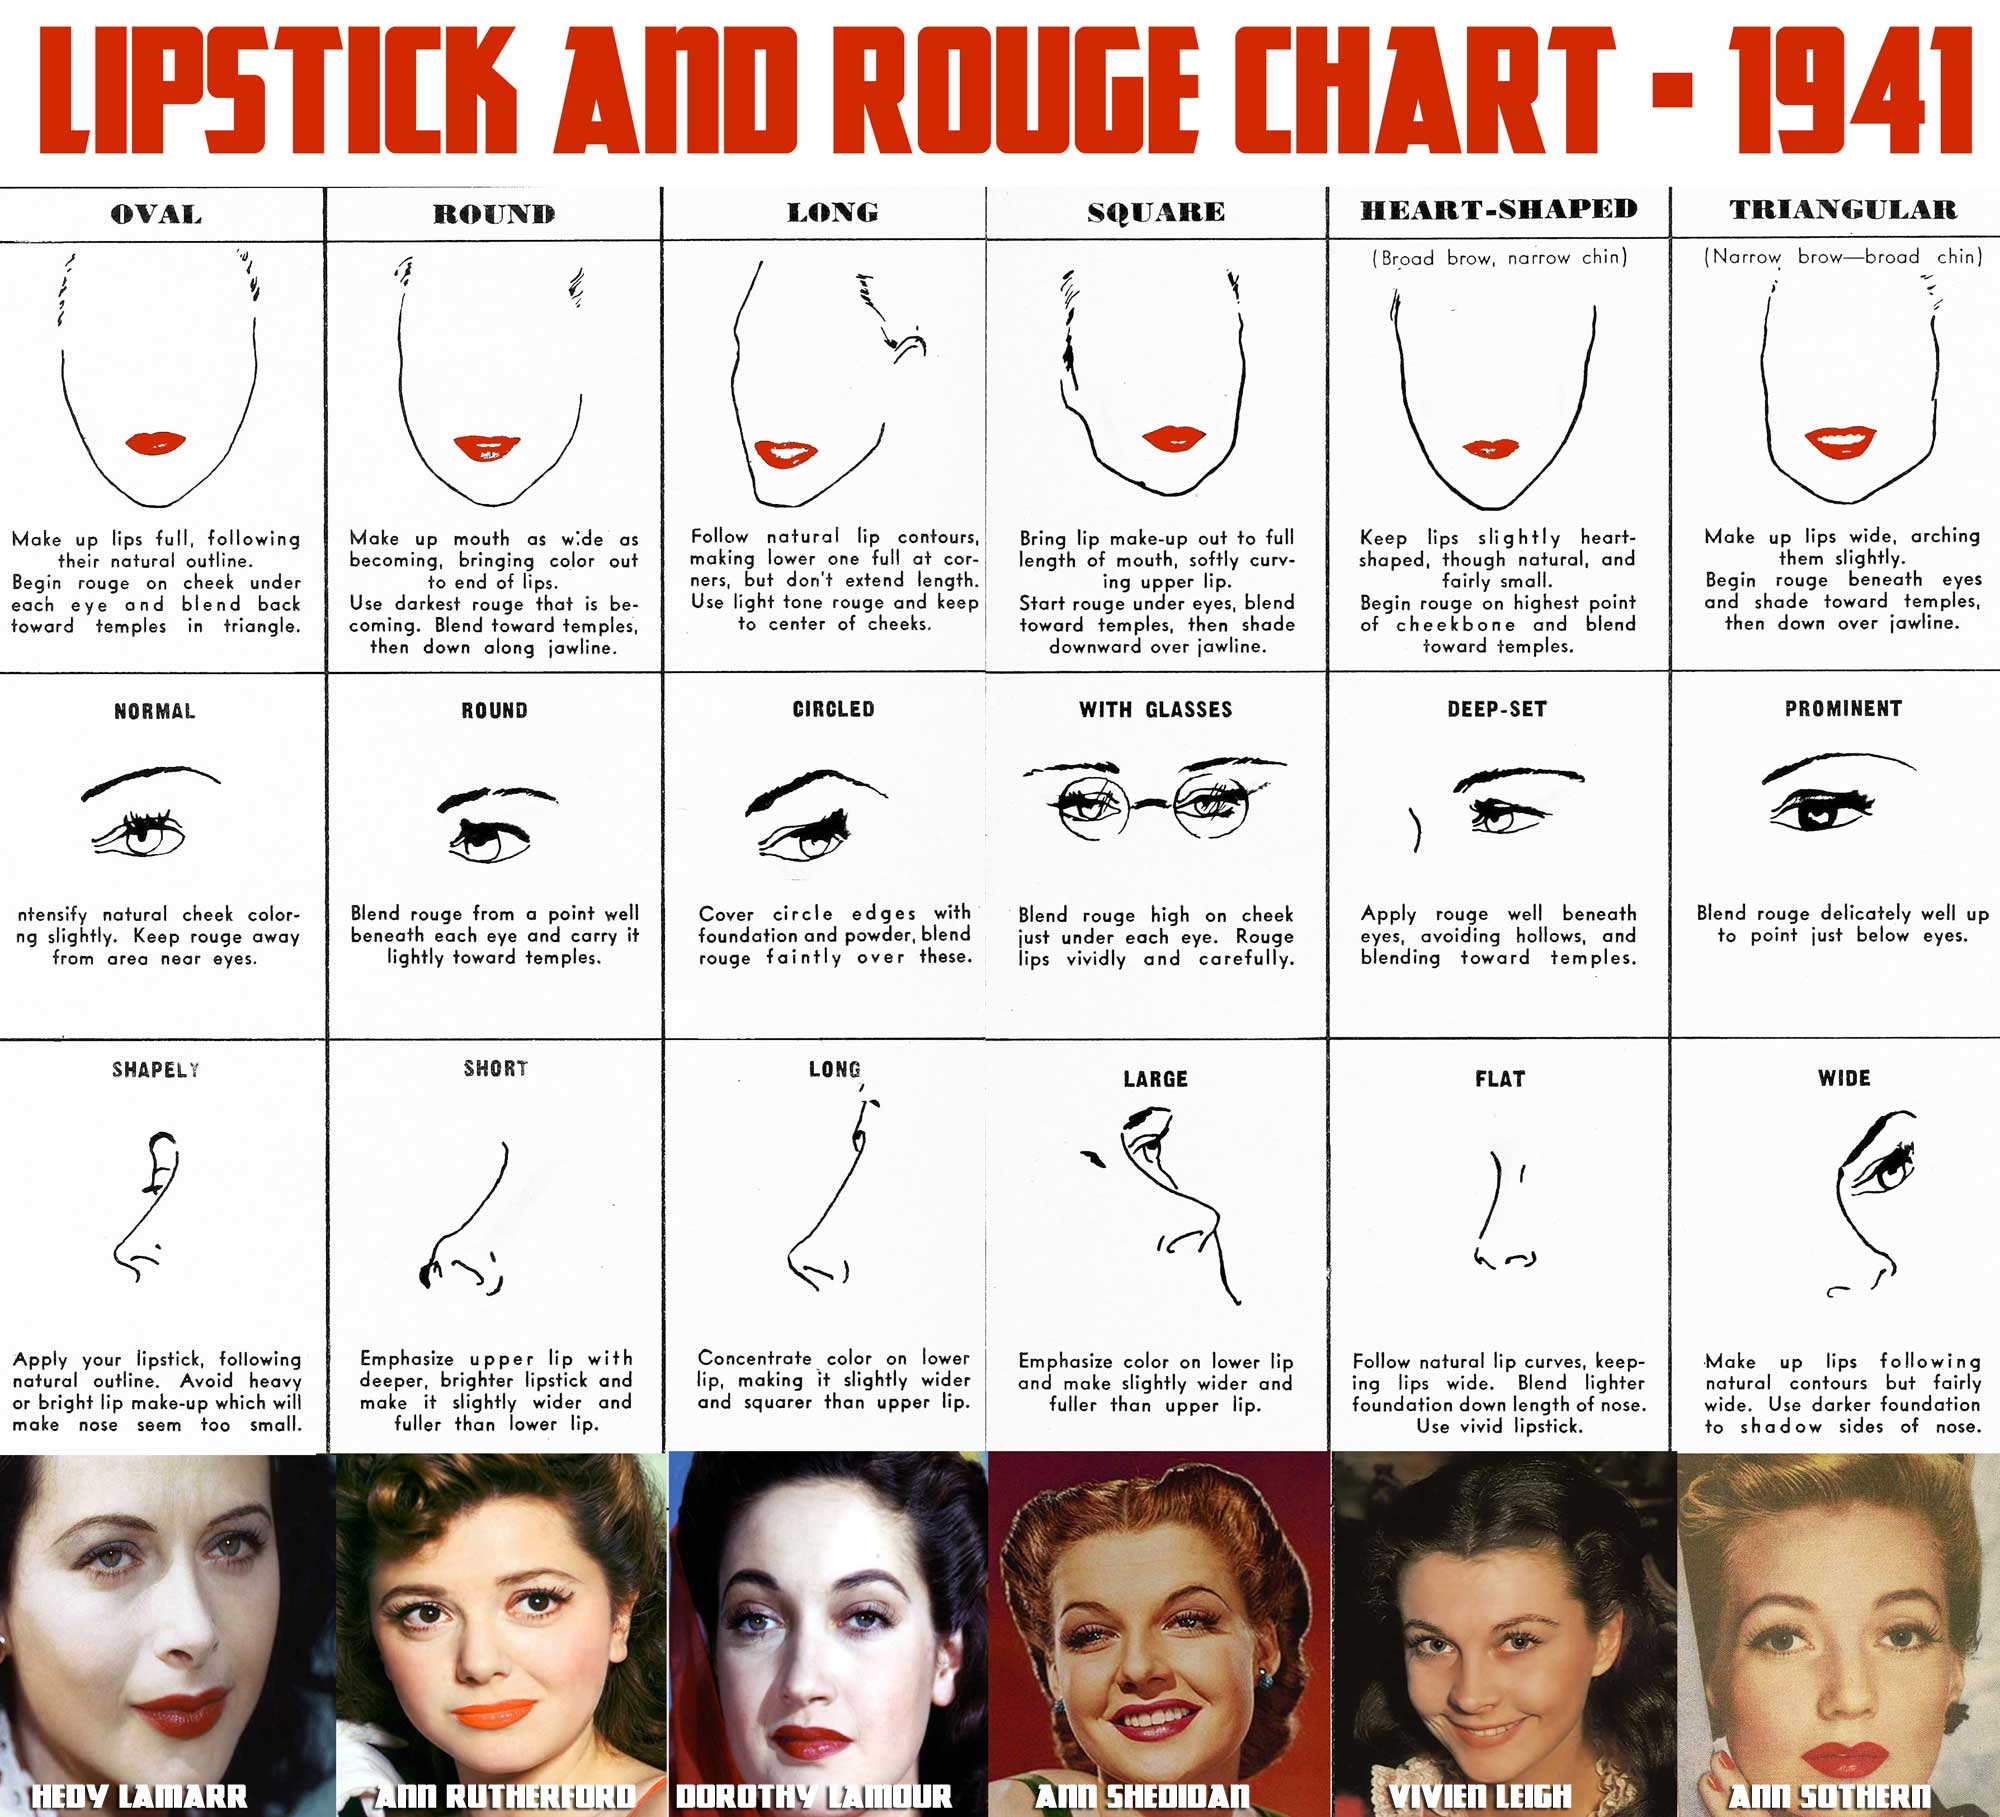 LIPSTICK-AND-ROUGE-CHART-1941